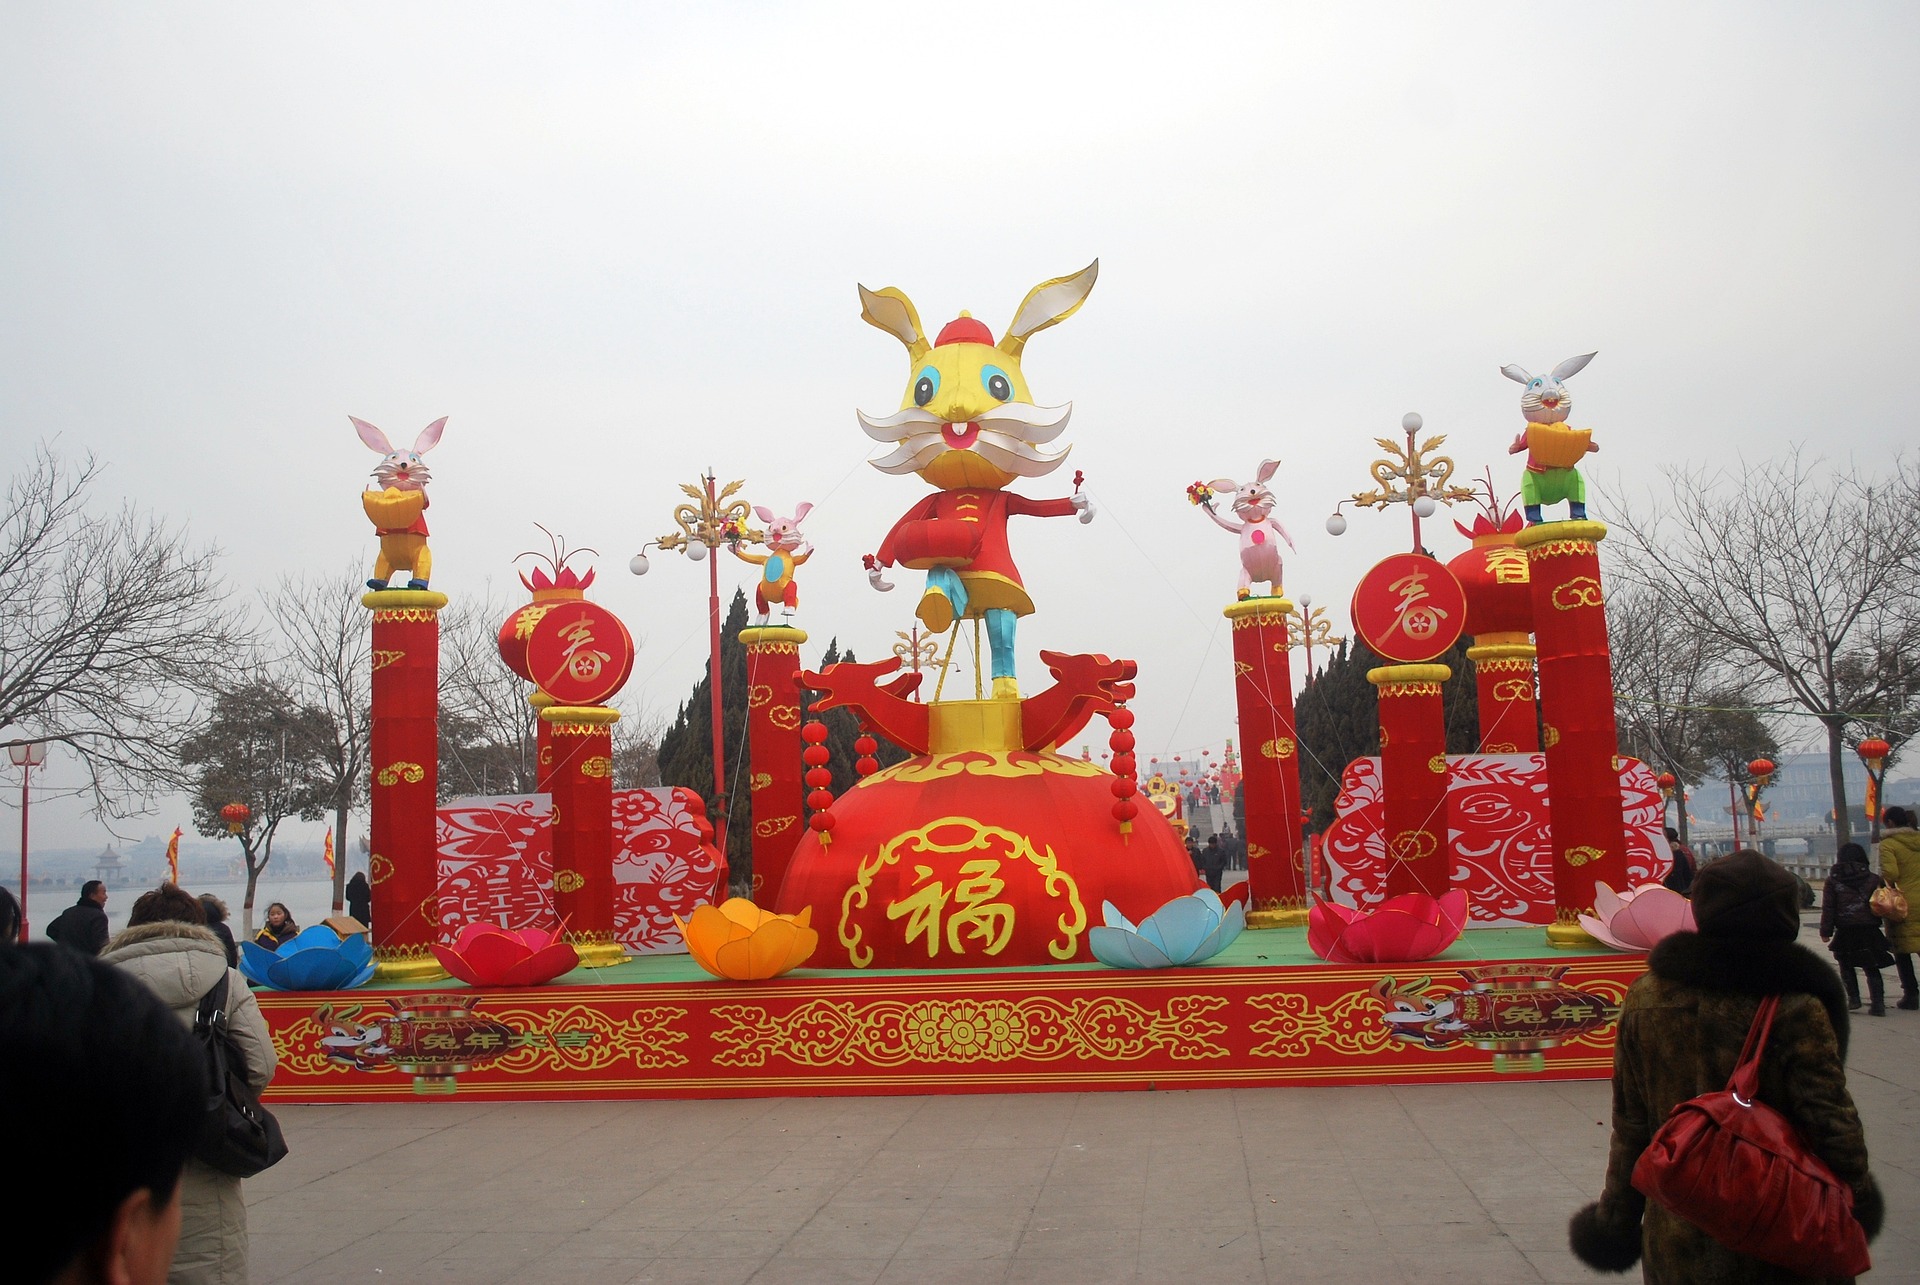 Year of the Rabbit display on the street with a giant rabbit in red Chinese clothes on the center